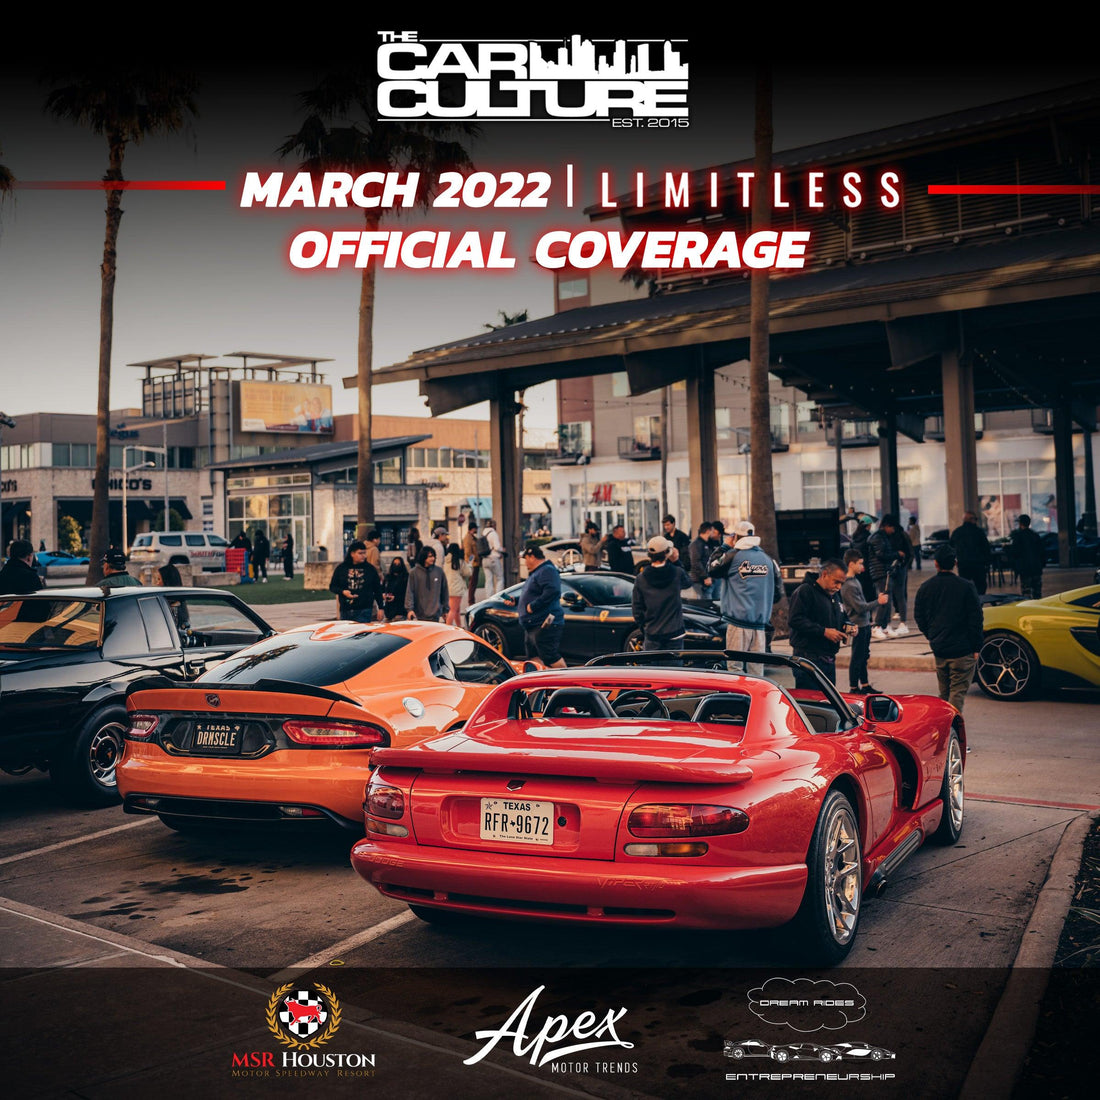 Houston Car Meets | Limitless | March 2022 - The Car Culture